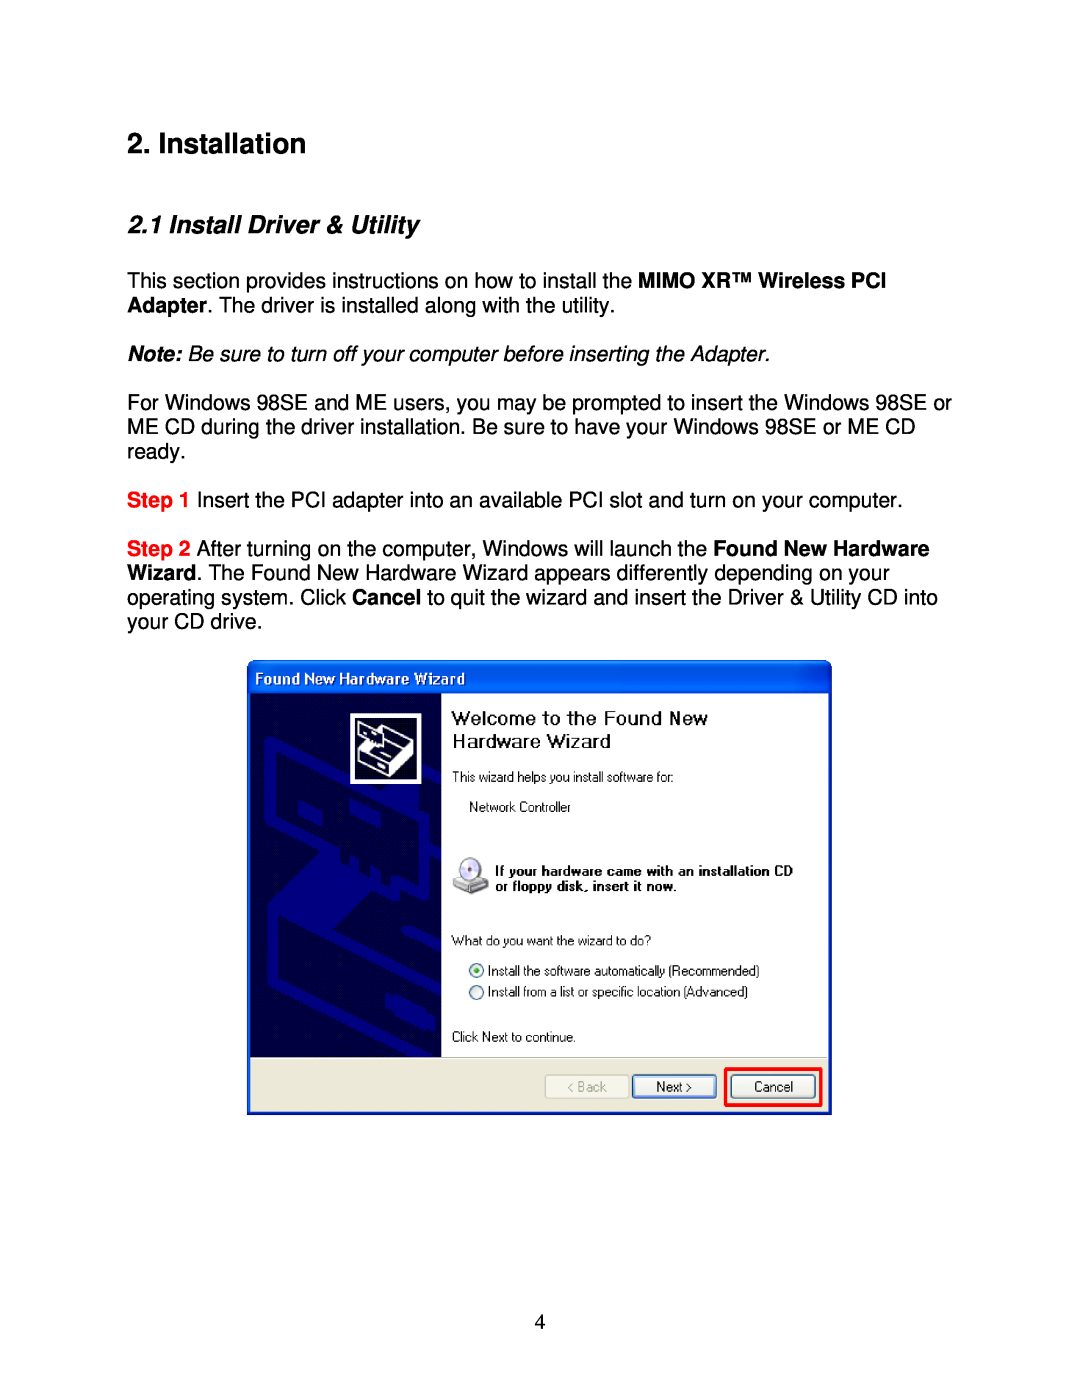 Airlink101 AWLH5025 user manual Installation, Install Driver & Utility 